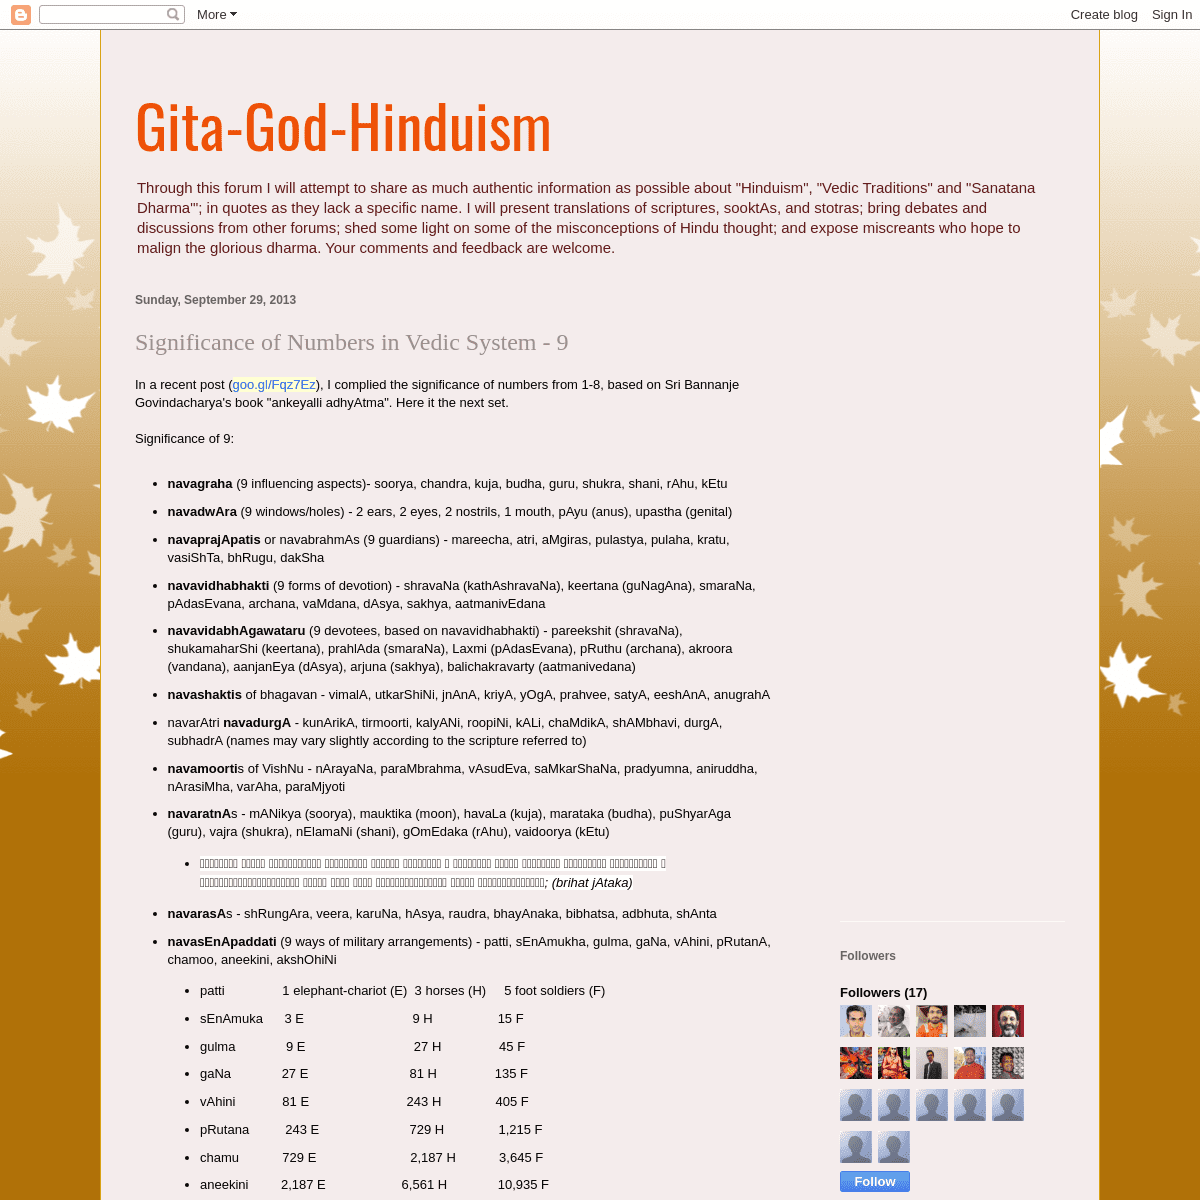 A complete backup of https://gita-god-hinduism.blogspot.com/2013/09/significance-of-numbers-in-vedic-system.html